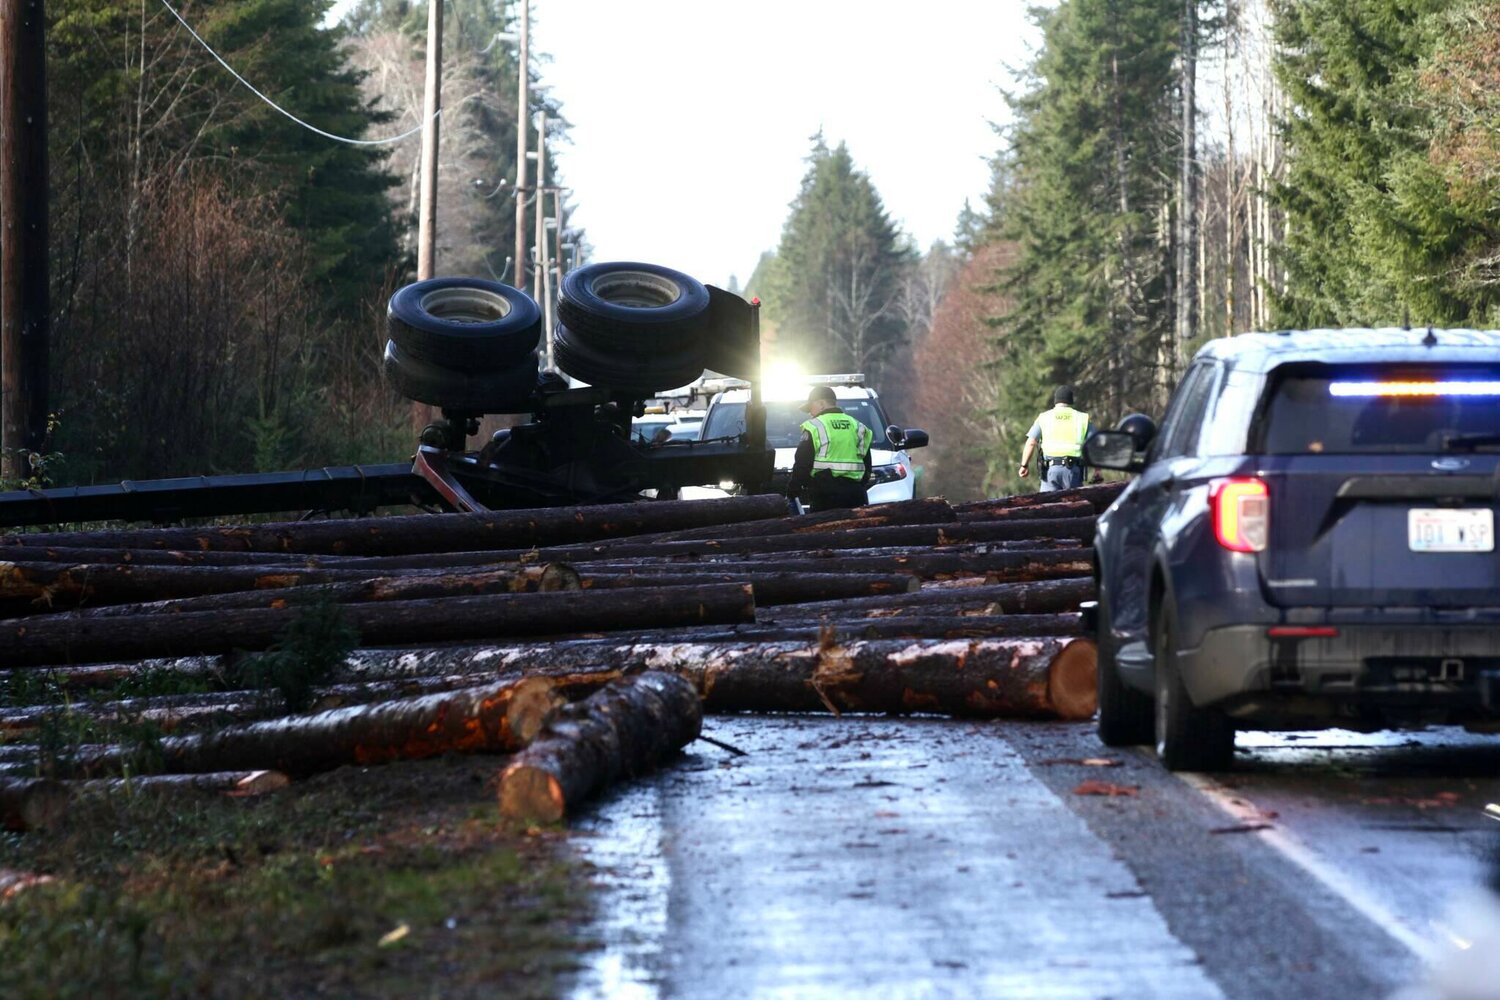 A log truck was involved in a fatal motor vehicle crash on Friday morning on 101. (Michael S. Lockett / The Daily World)